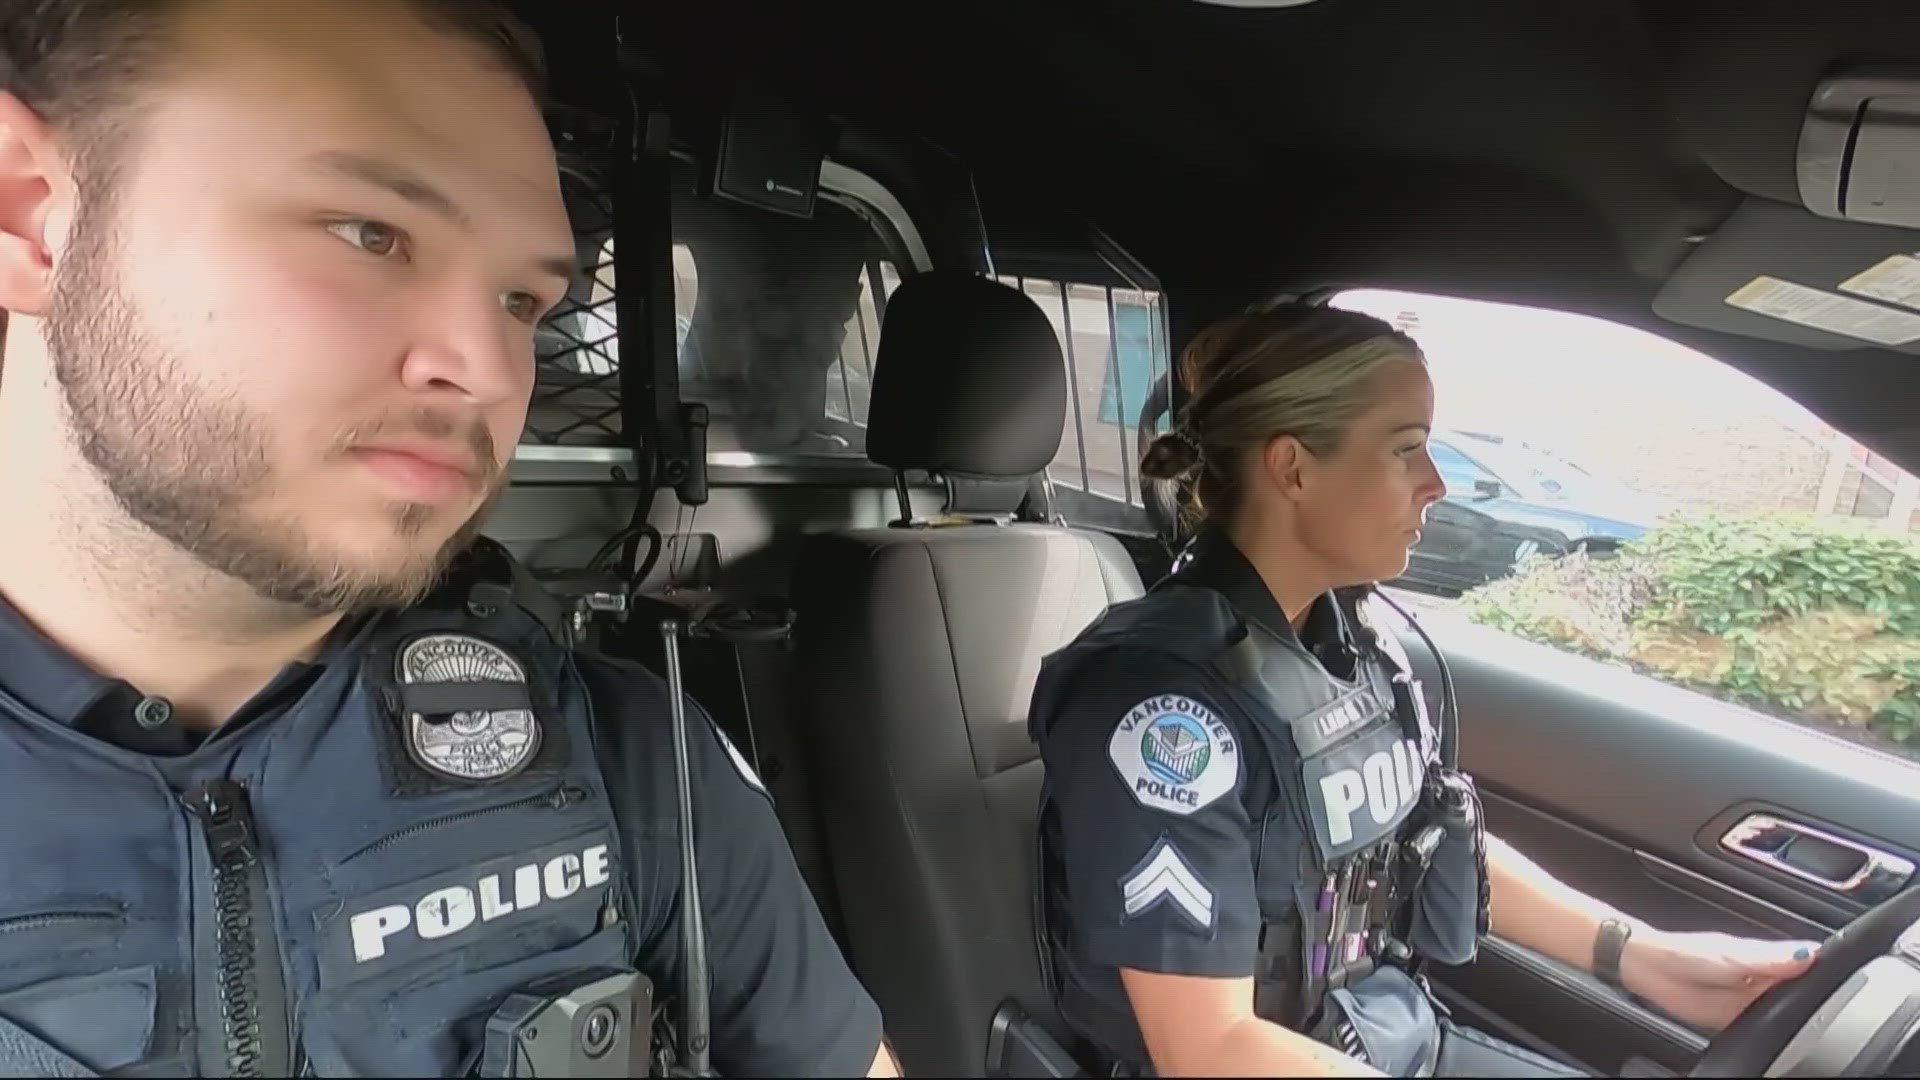 Officer Desmond Haske has been with the Vancouver Police Department for two years now. This month he worked his first shift with his mom, a corporal.